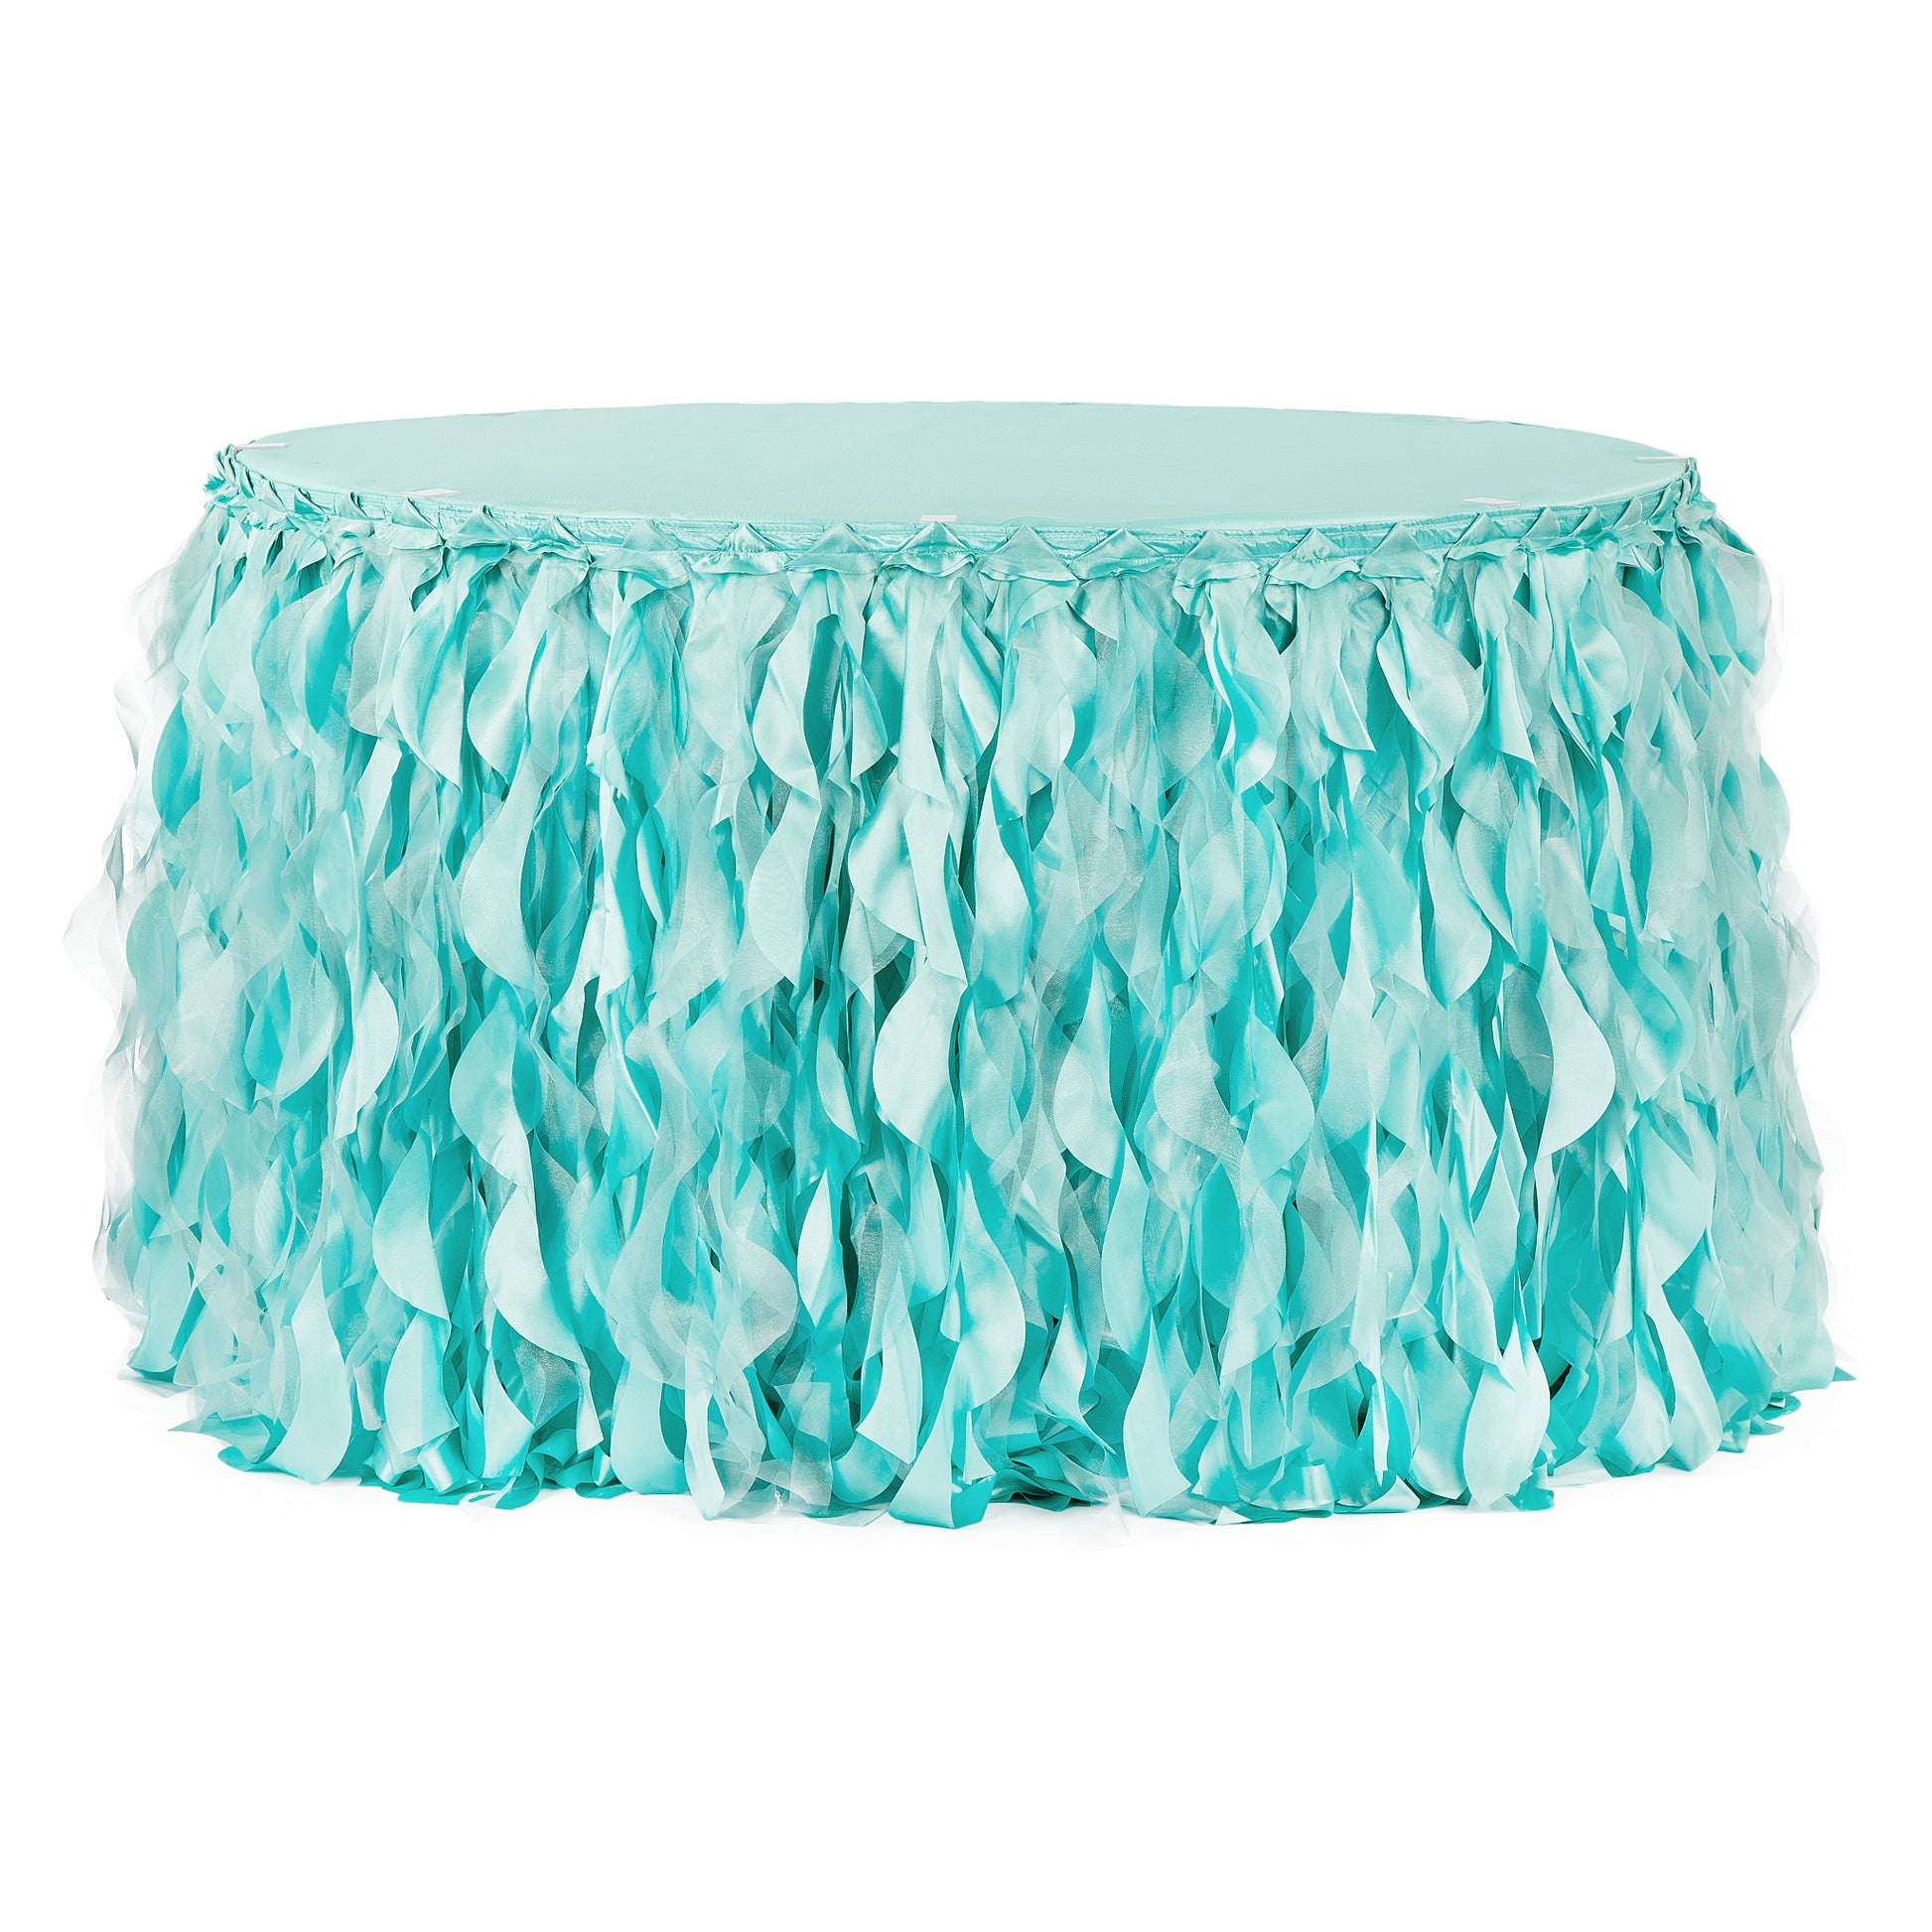 Curly Willow 14ft Table Skirt - Turquoise - CV Linens